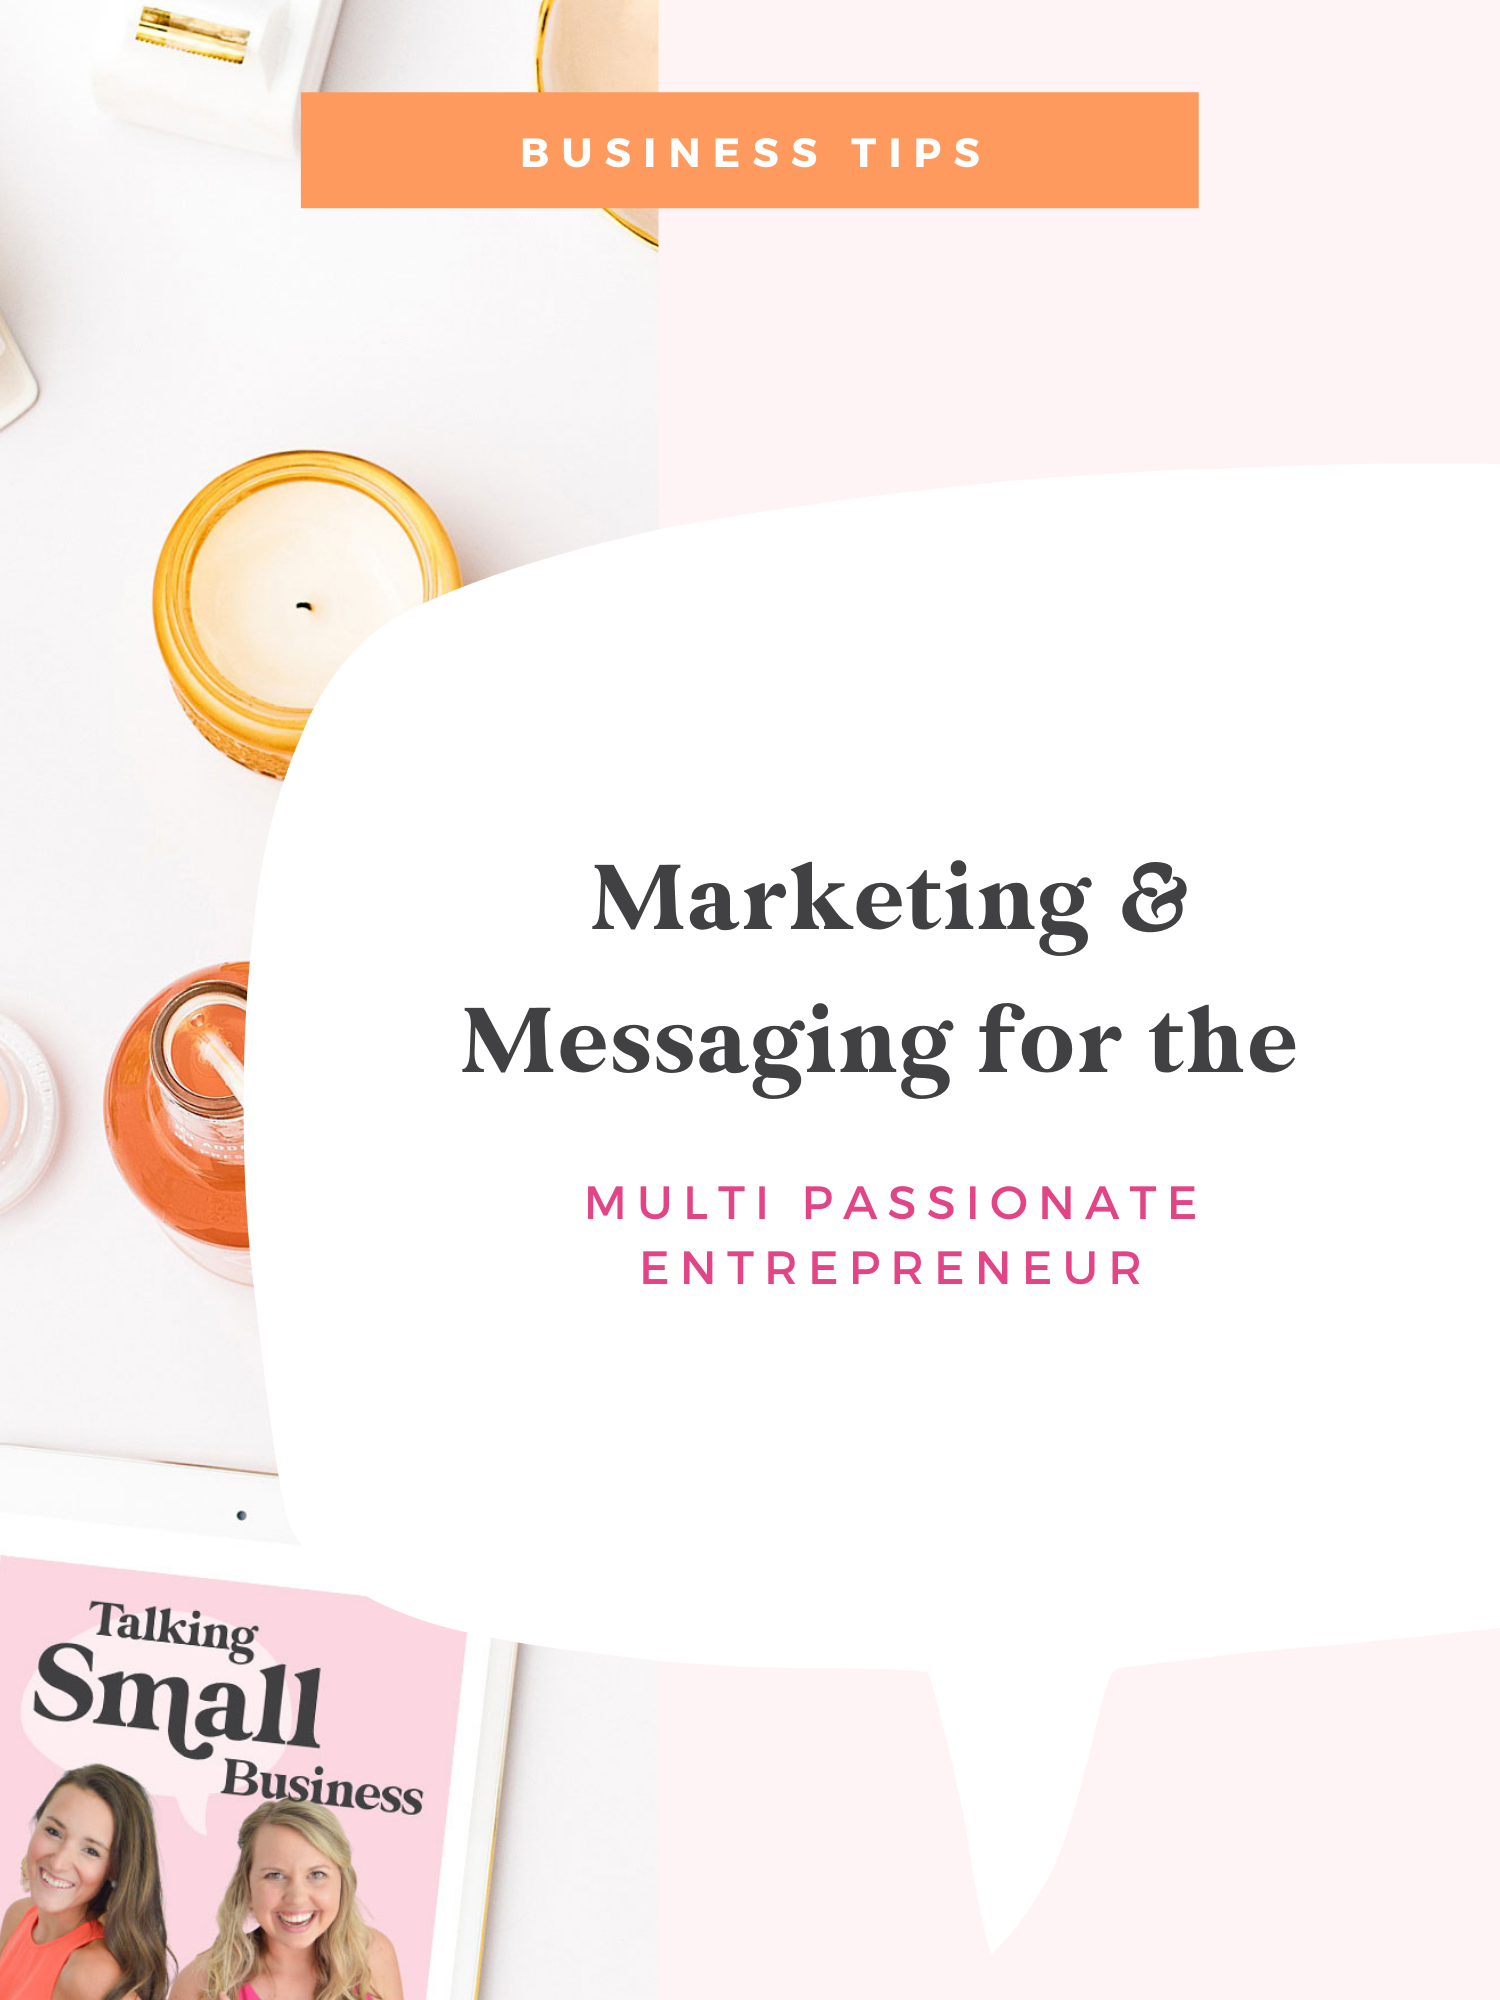 Marketing and Messaging for the Multi Passionate Entrepreneur: tips to grow your brands shared on the Talking Small Business podcast